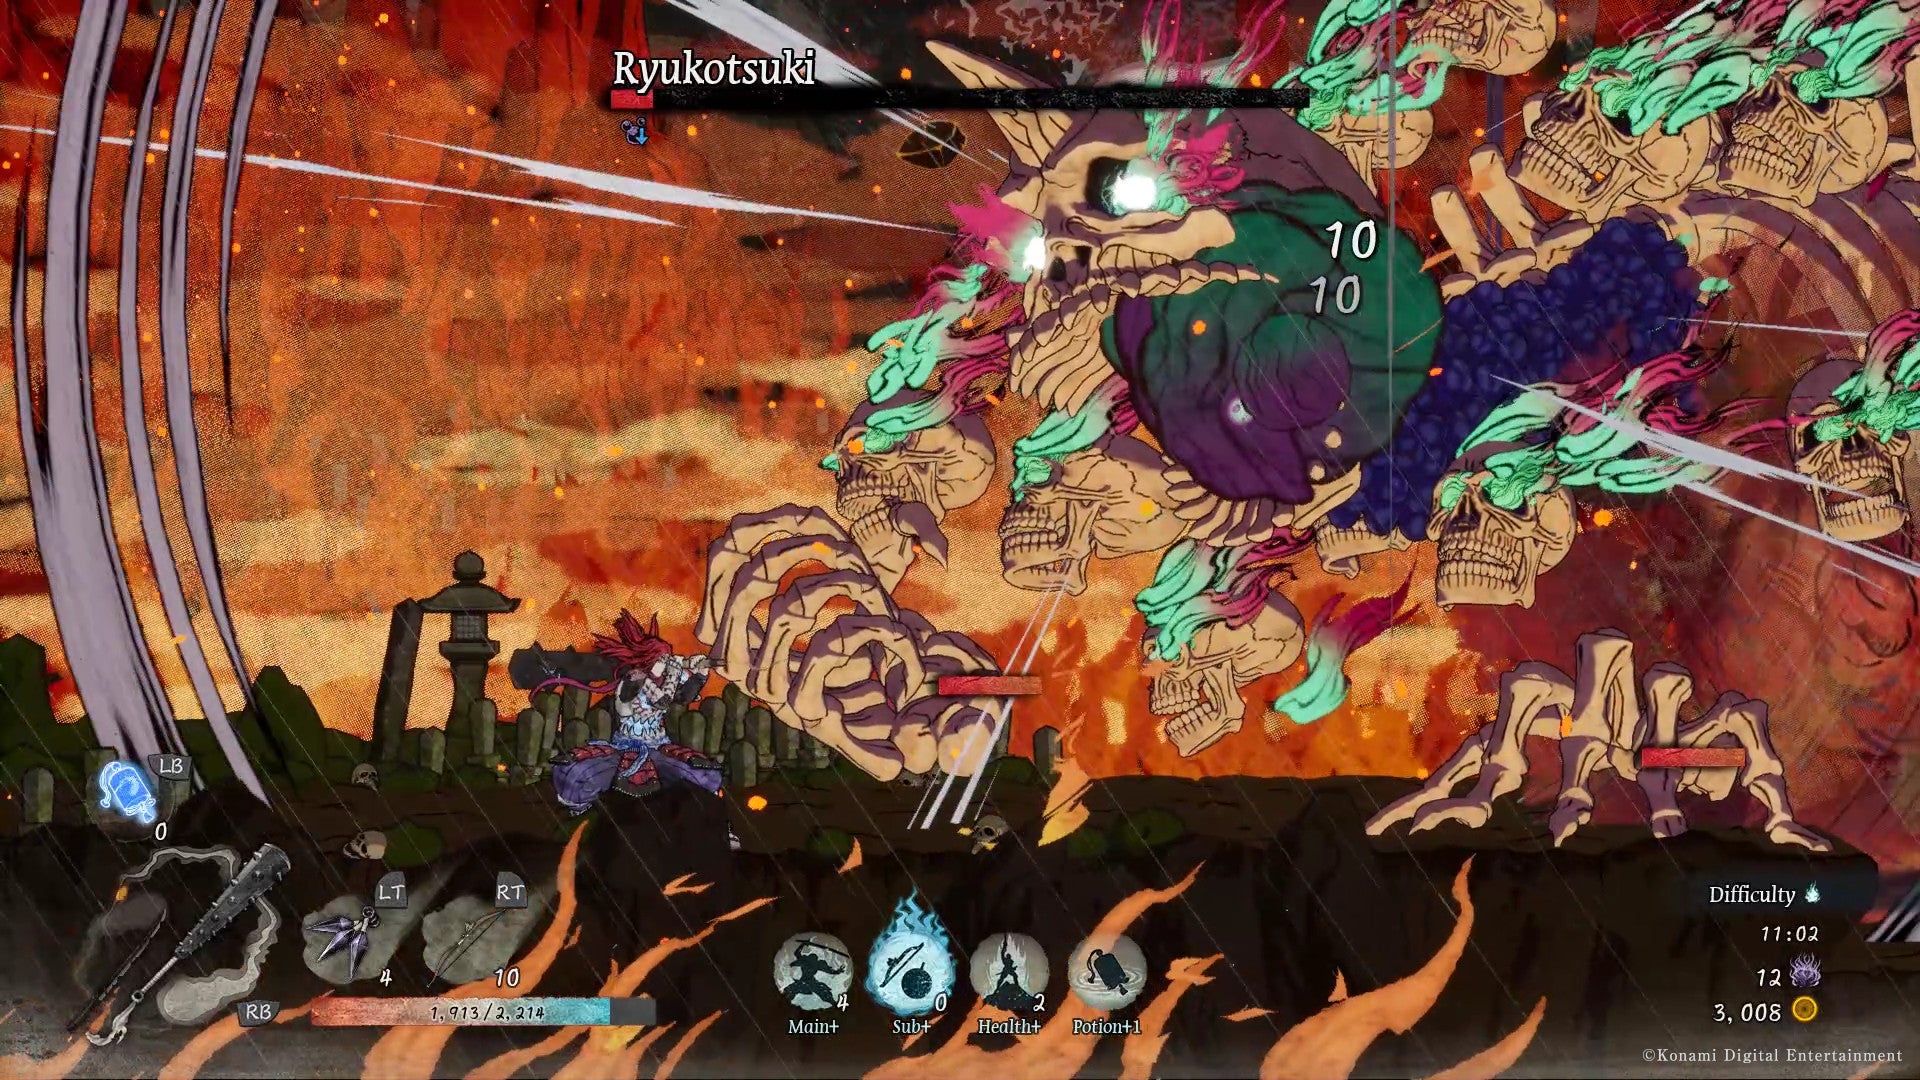 Getsufumaden - The main character battles a giant skeleton in a 2D sidescrolling environment.